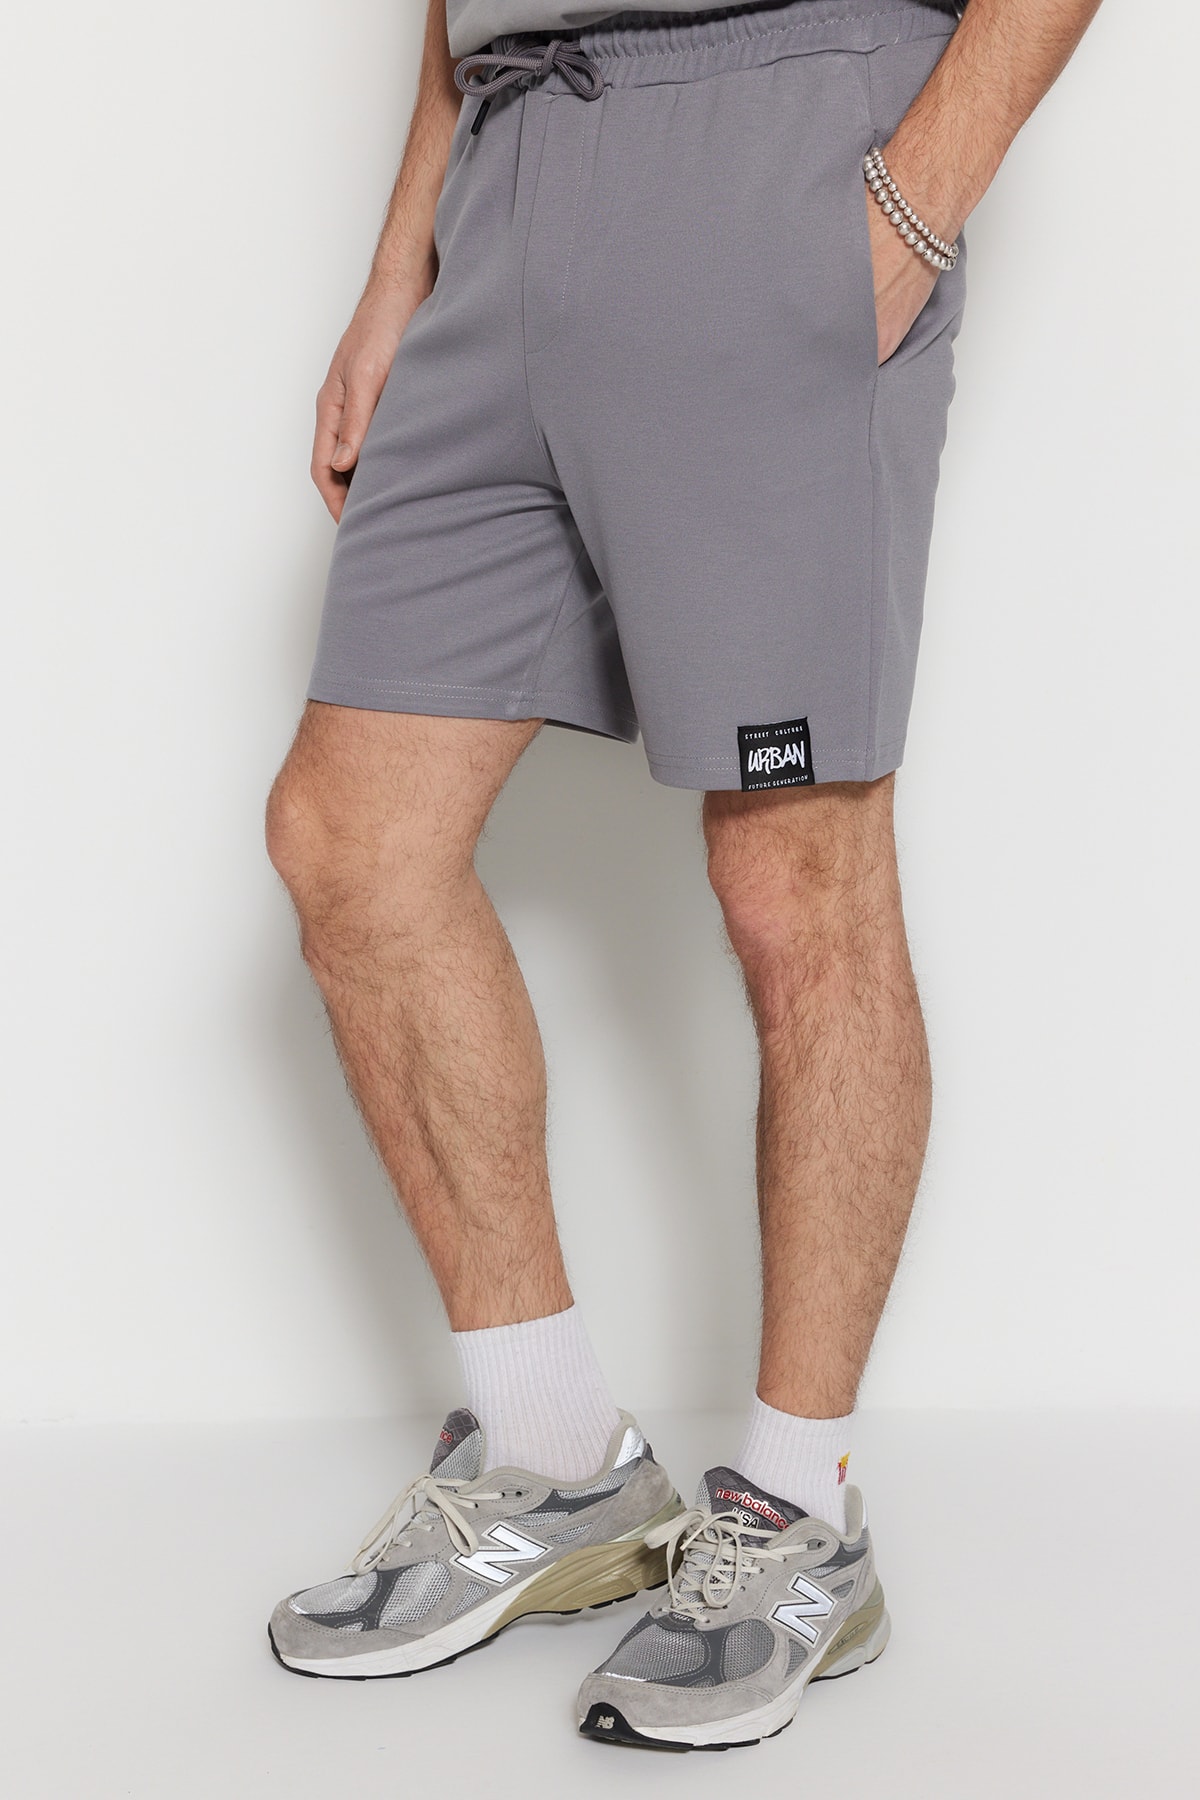 Trendyol Smoked Men's Regular/Normal Cut Shorts with Embroidered Labels.